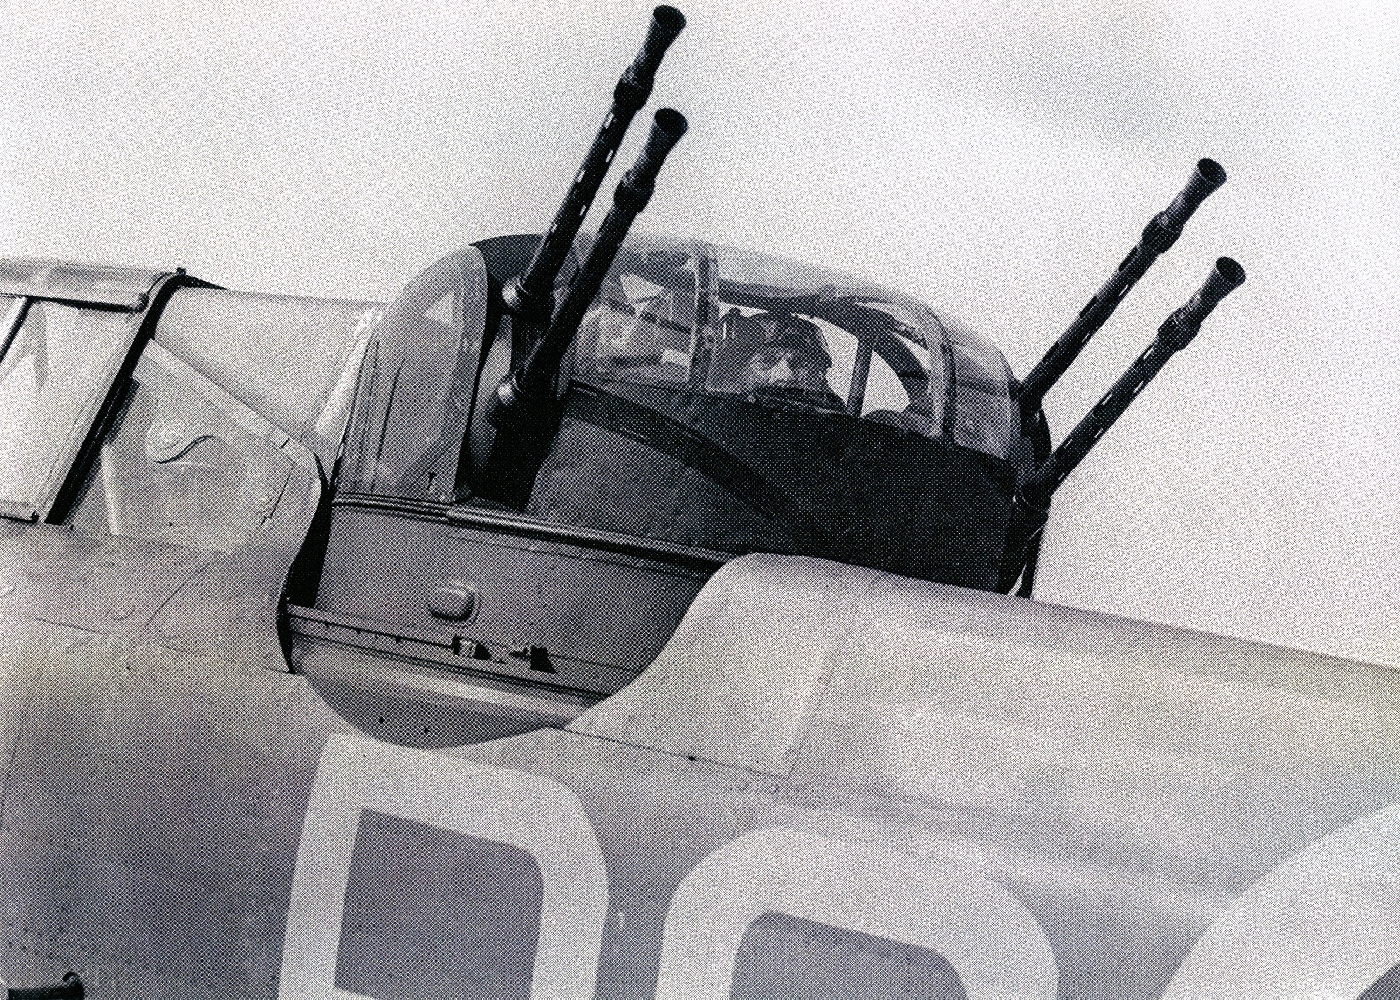 In this photo reproduction, we see a British Boulton-Paul Defiant turret on the back of a Spitfire fighter. It had quad machine guns.